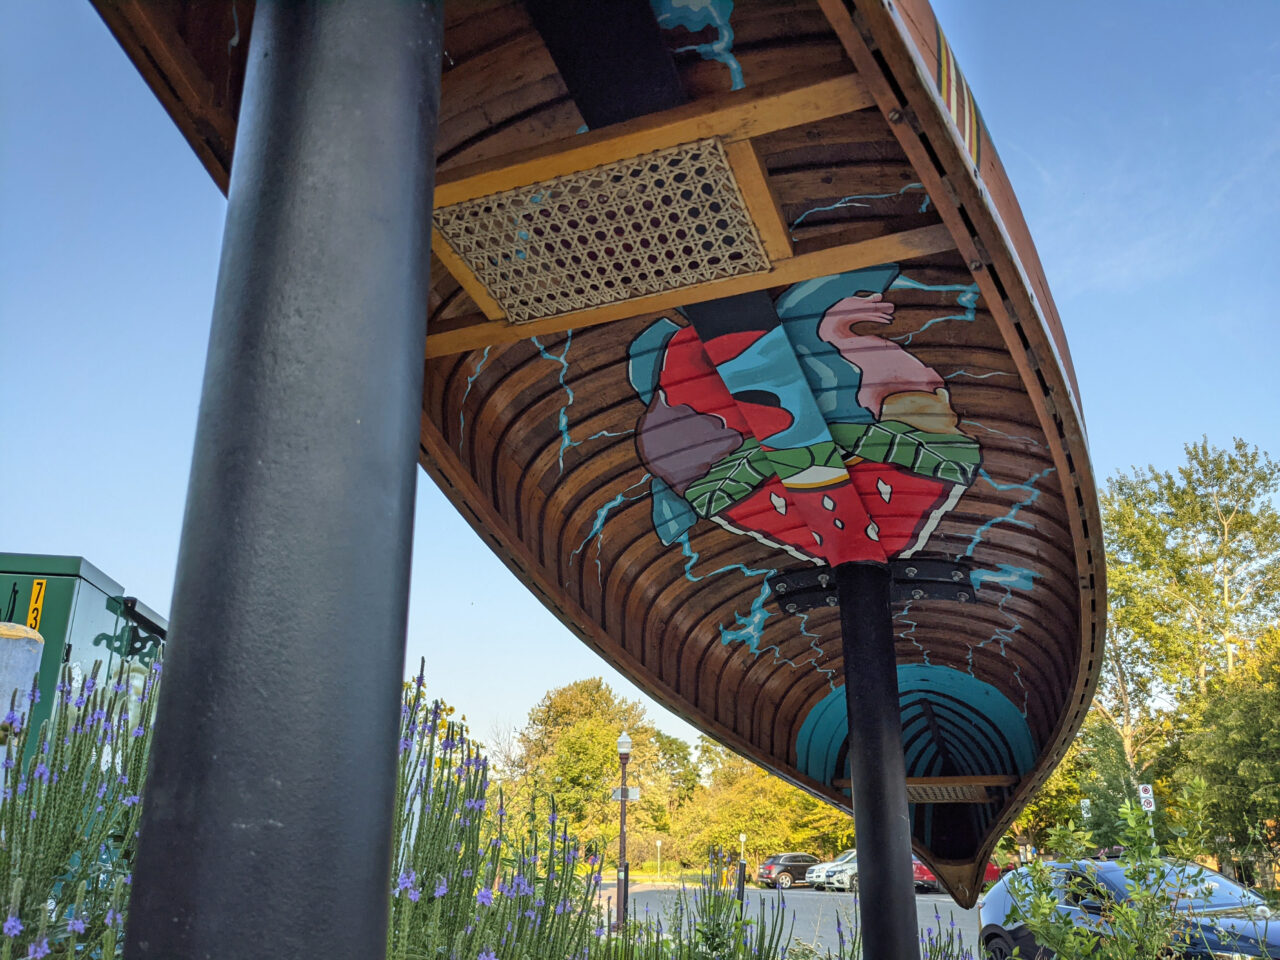 image of the underside of a canoe mounted upside down. Indigenous art painted inside the canoe.